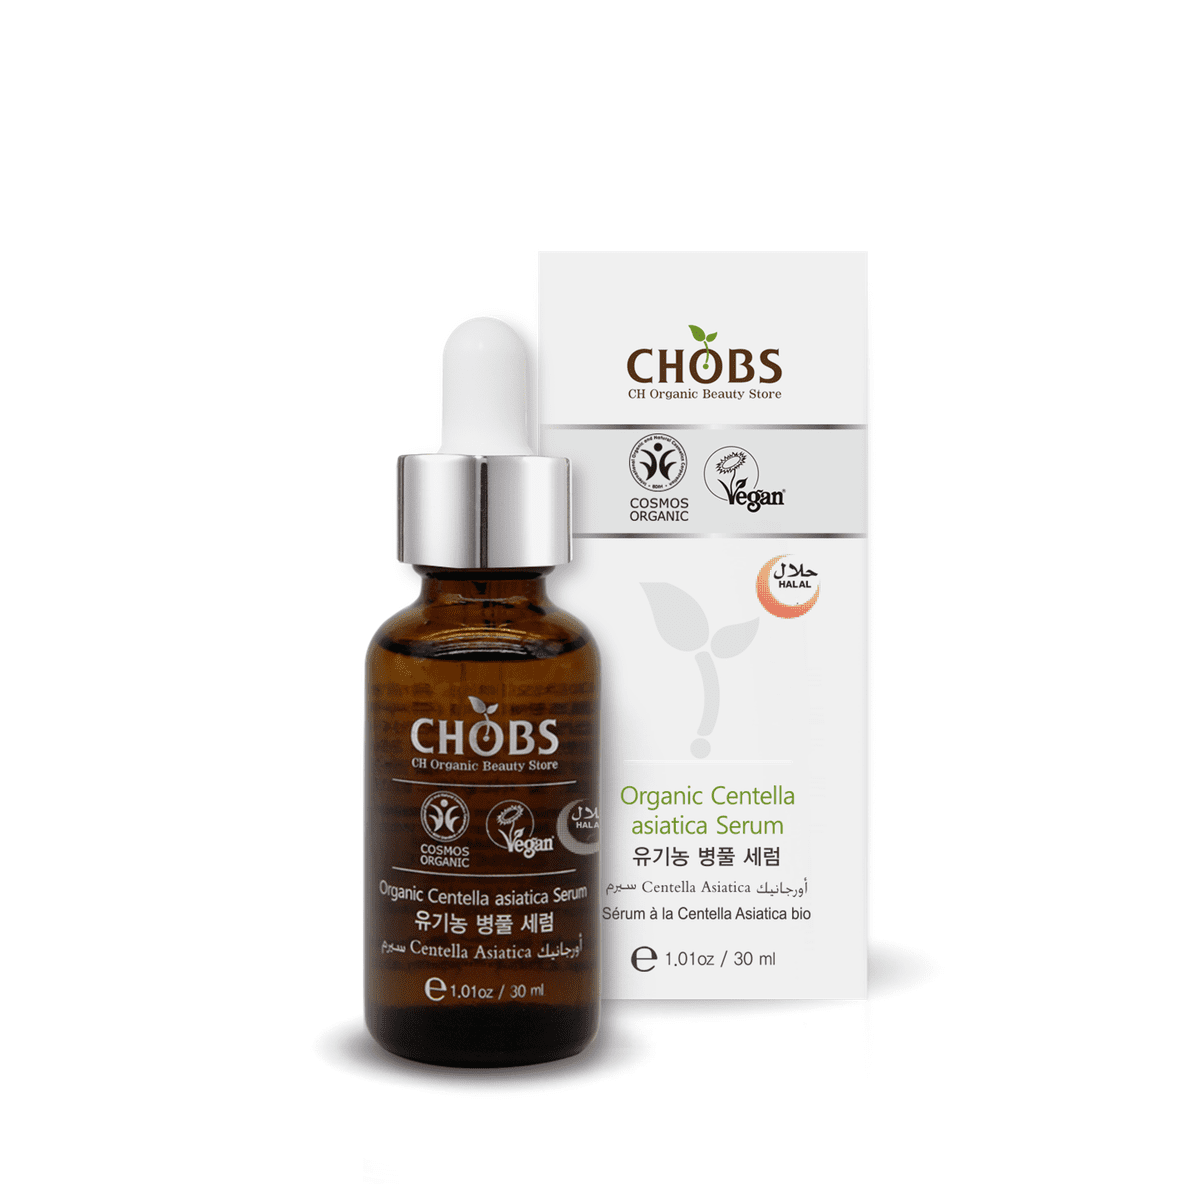 The CHOBS Organic Centella Asiatica Serumorganic is known to be lightweight and helps to soothe the skin, become one of the best organic skincare products in singapore